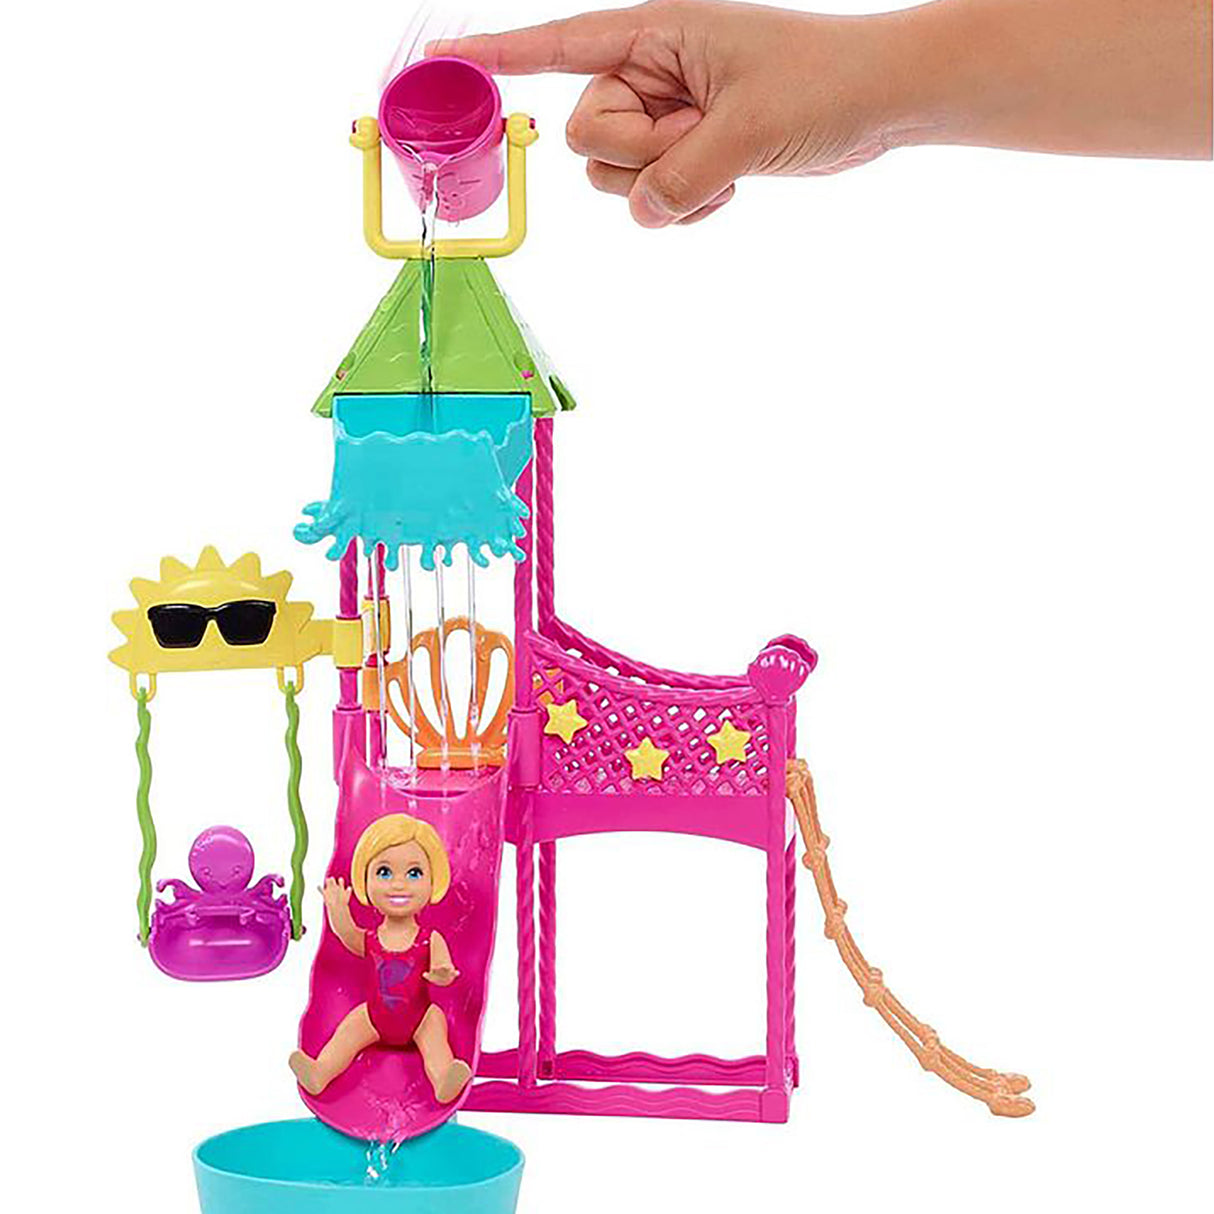 Barbie Toys, Skipper Doll and Waterpark Playset with Working Water Slide and Accessories, First Jobs